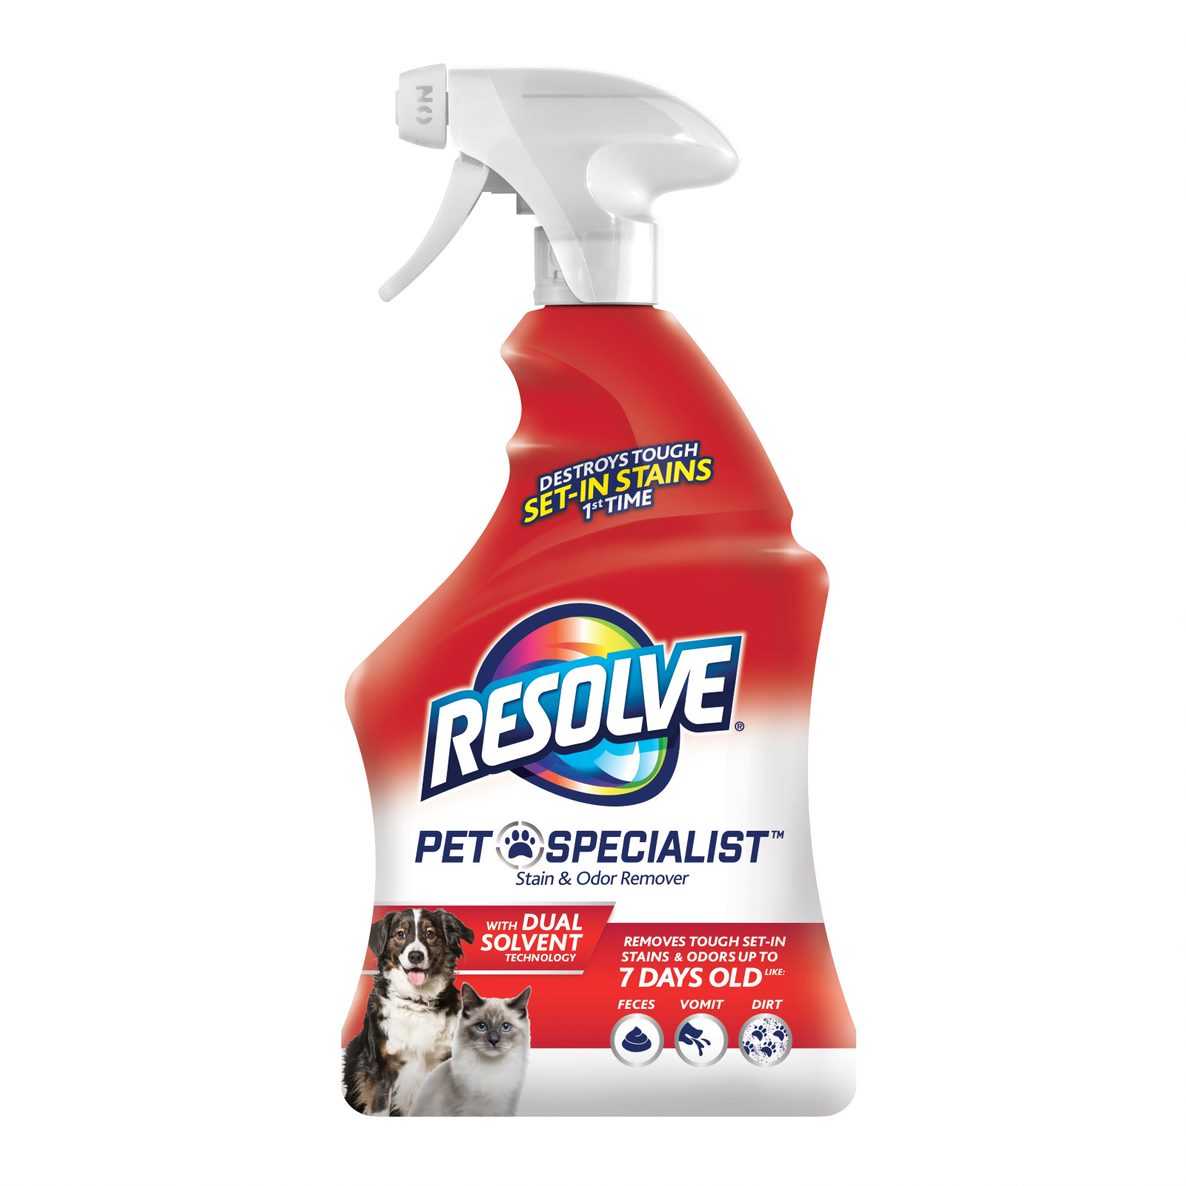 Resolve® Pet Specialist Stain & Odor Remover